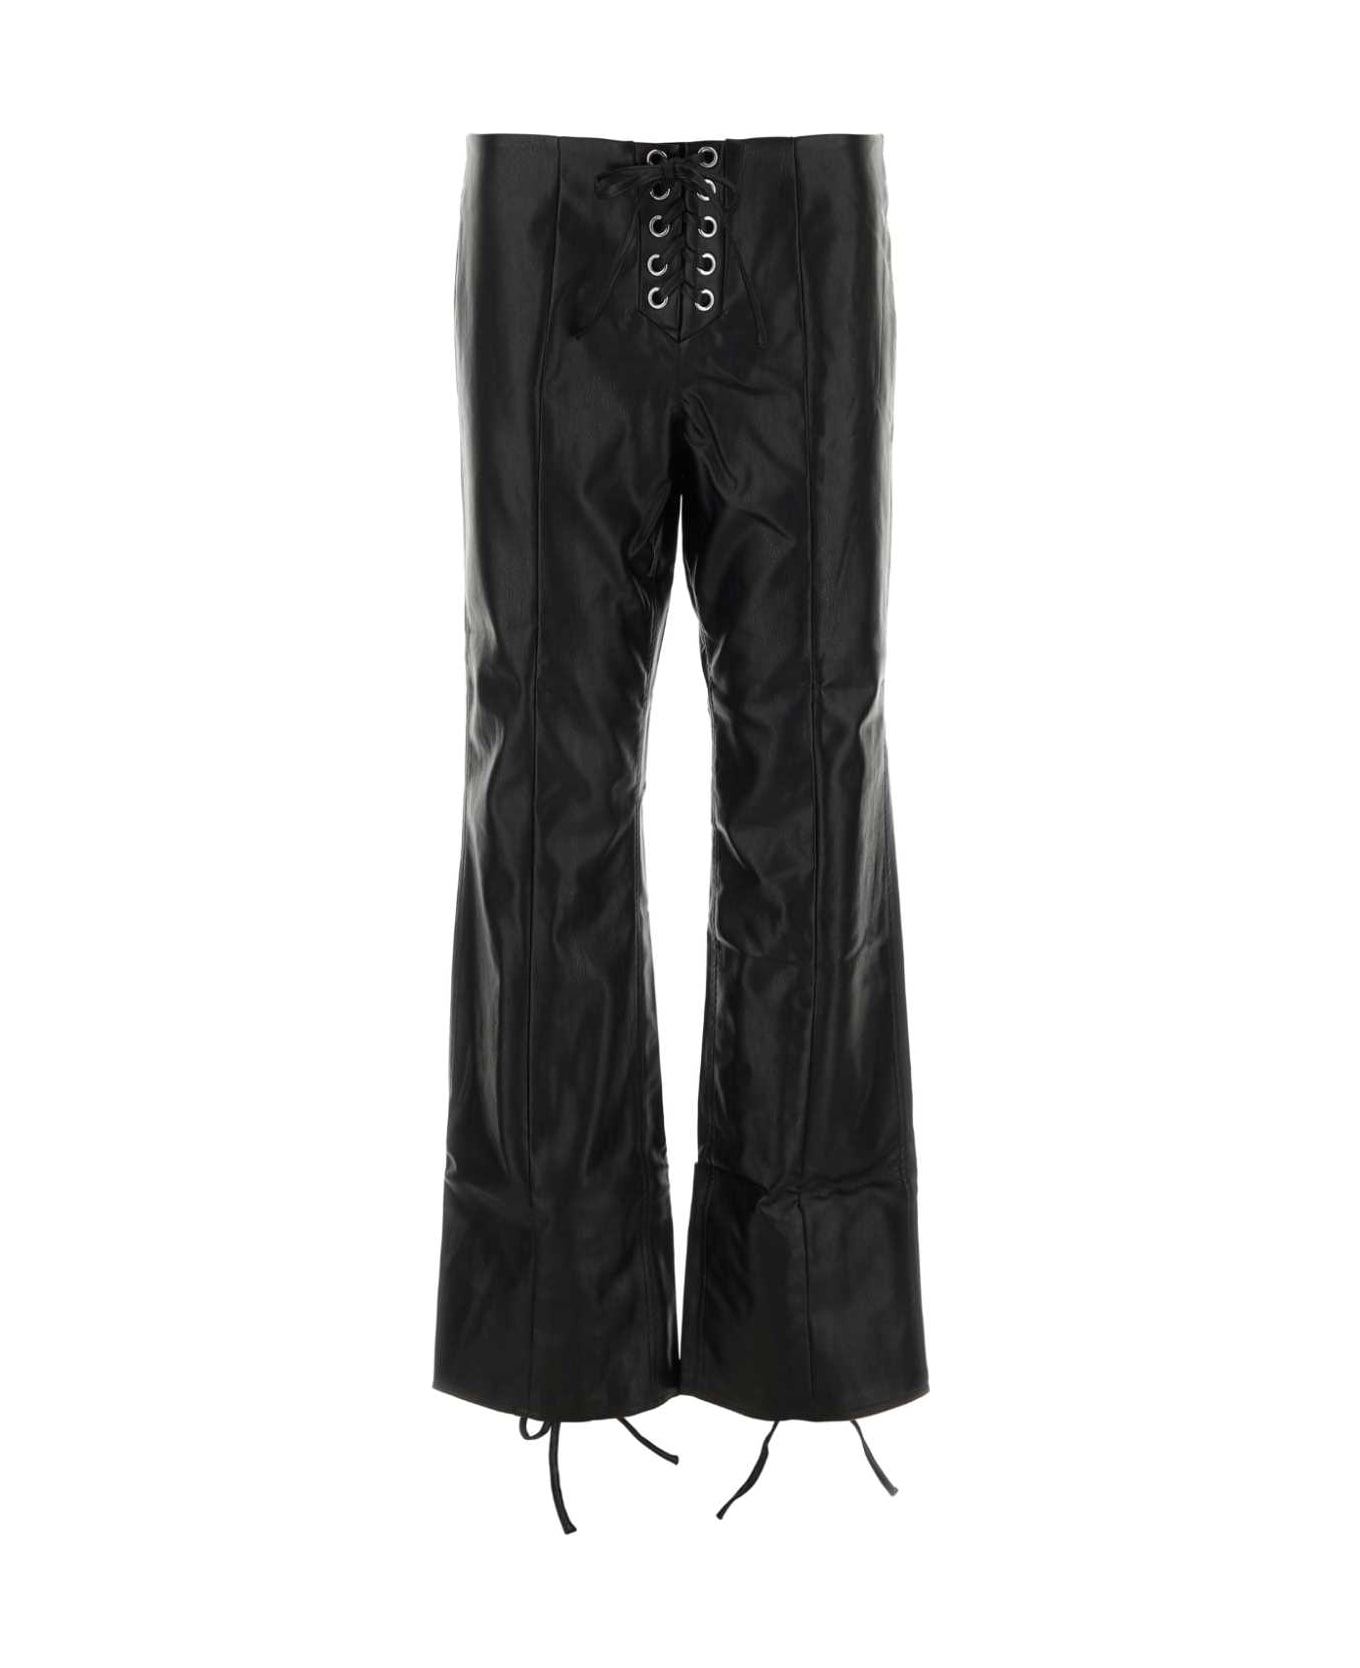 Rotate by Birger Christensen Black Synthetic Leather Pant - BLACK ボトムス